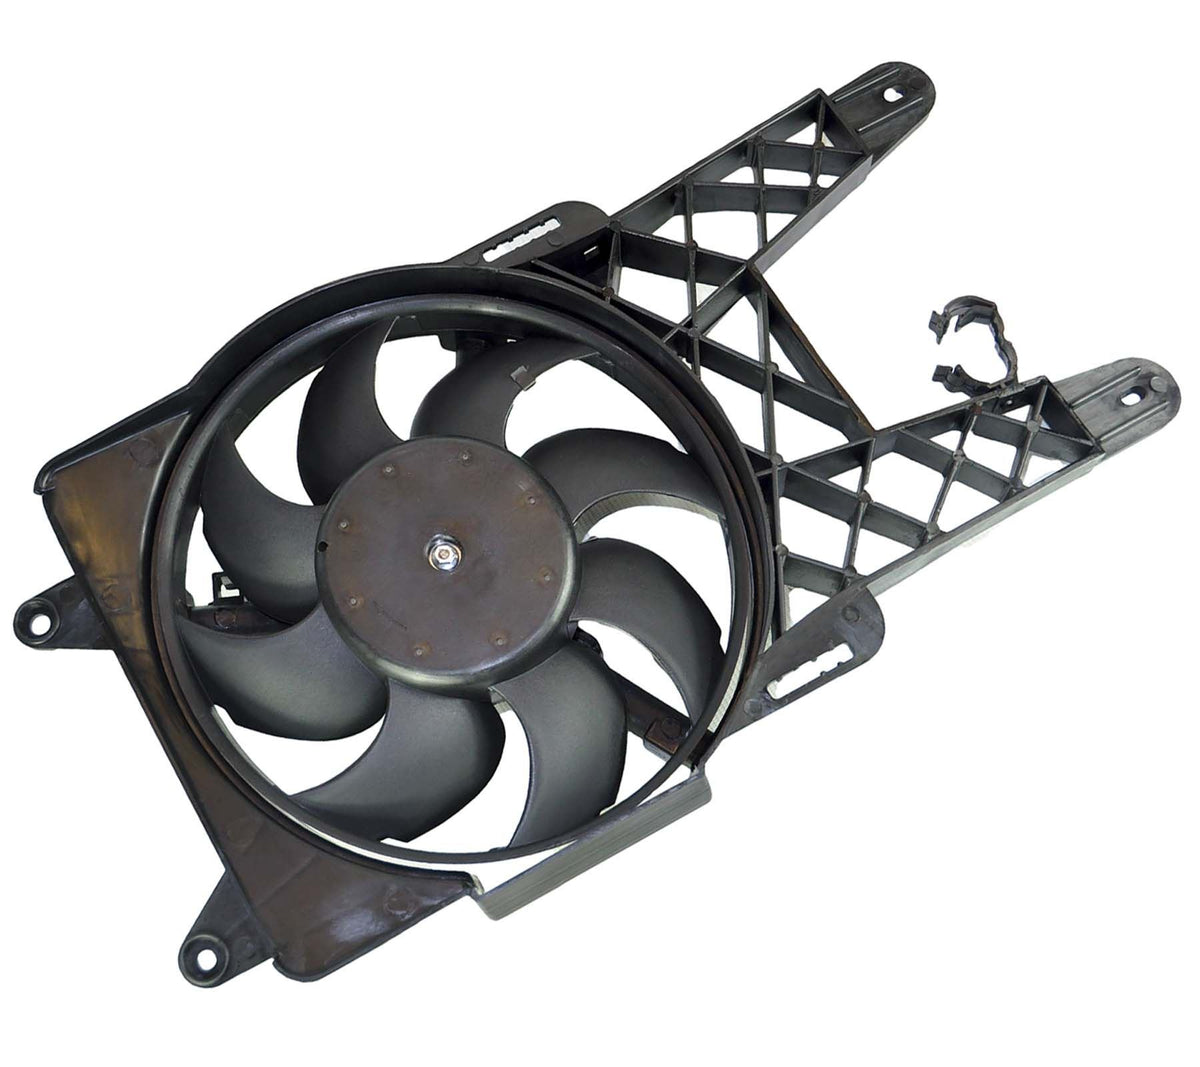 Radiator Cooling Fan With Motor For Fiat Seicento 187 0.9, 1.0, 1.1 Petrol (1998-2010) 70739400